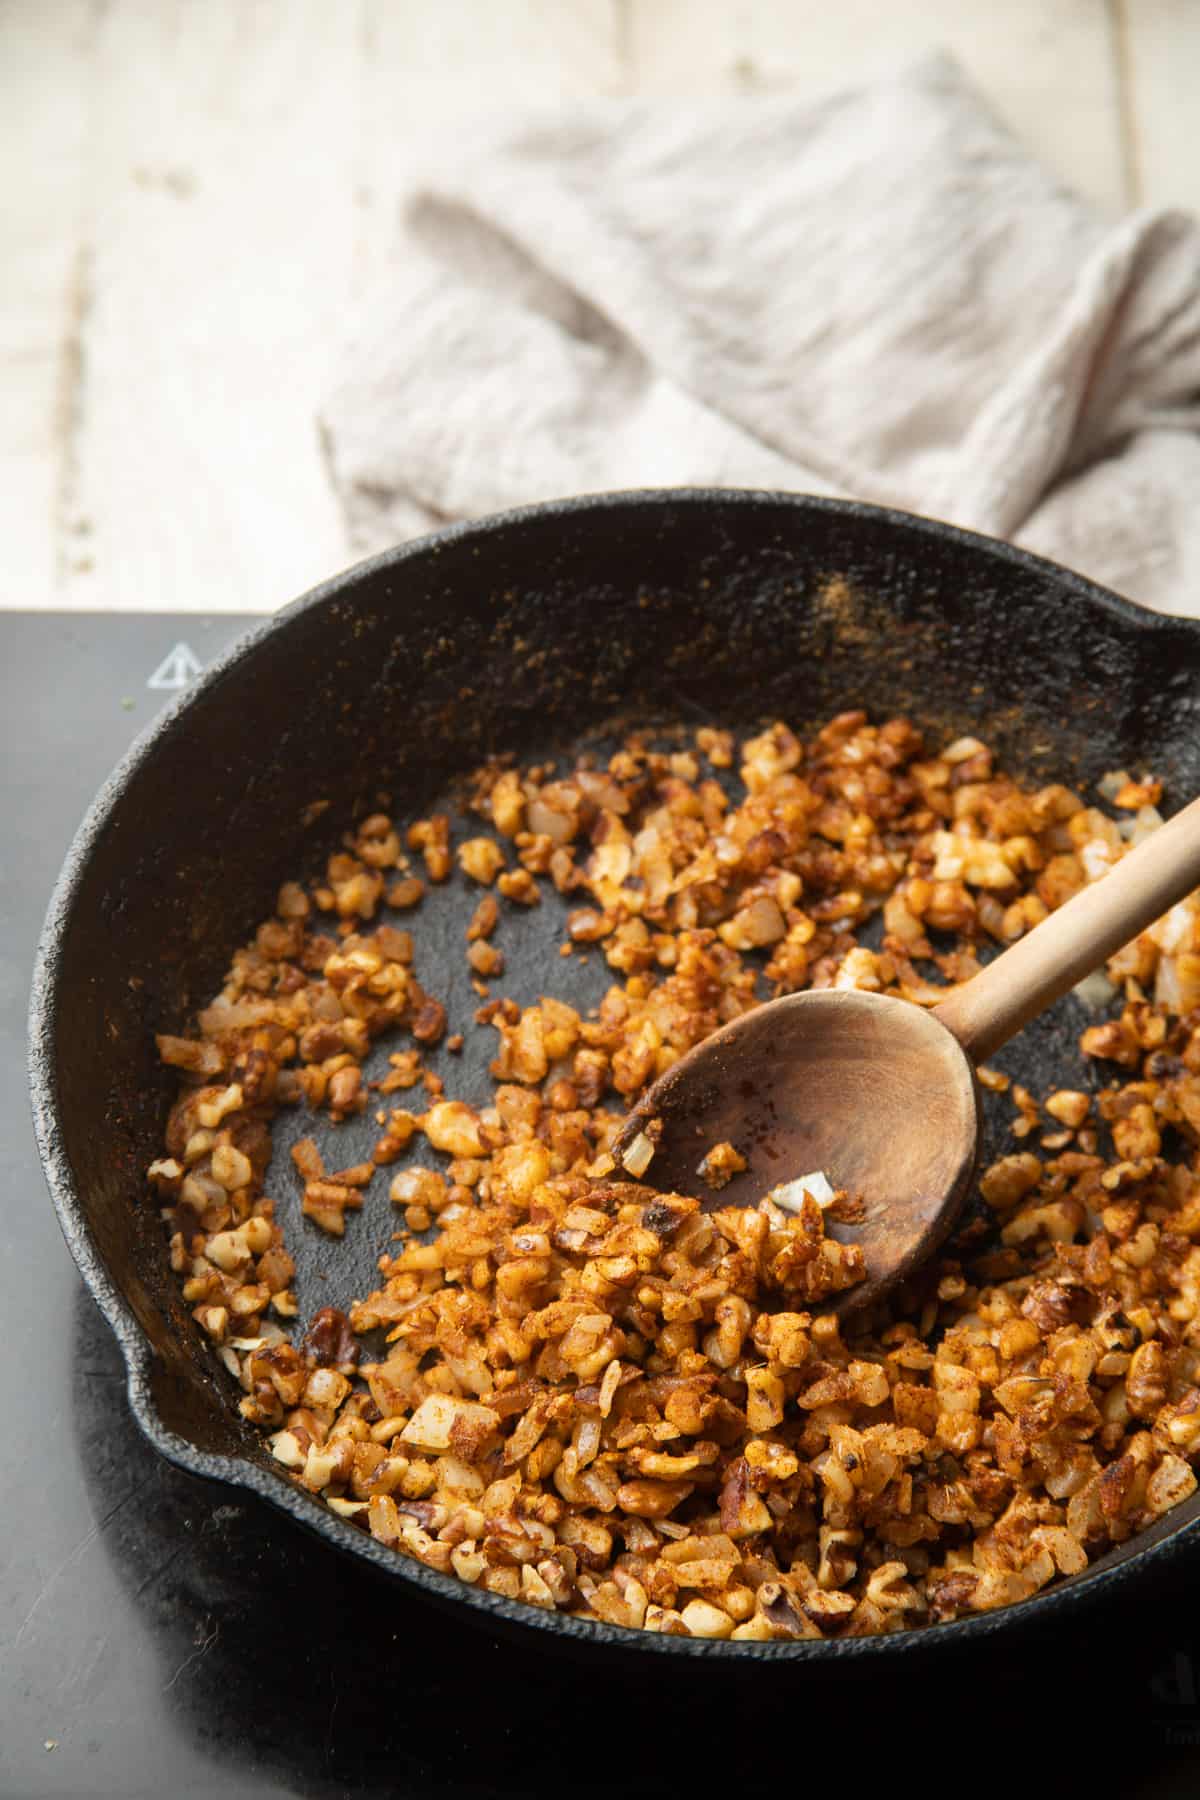 Onions, garlic, spices and walnuts cooking in a skillet.